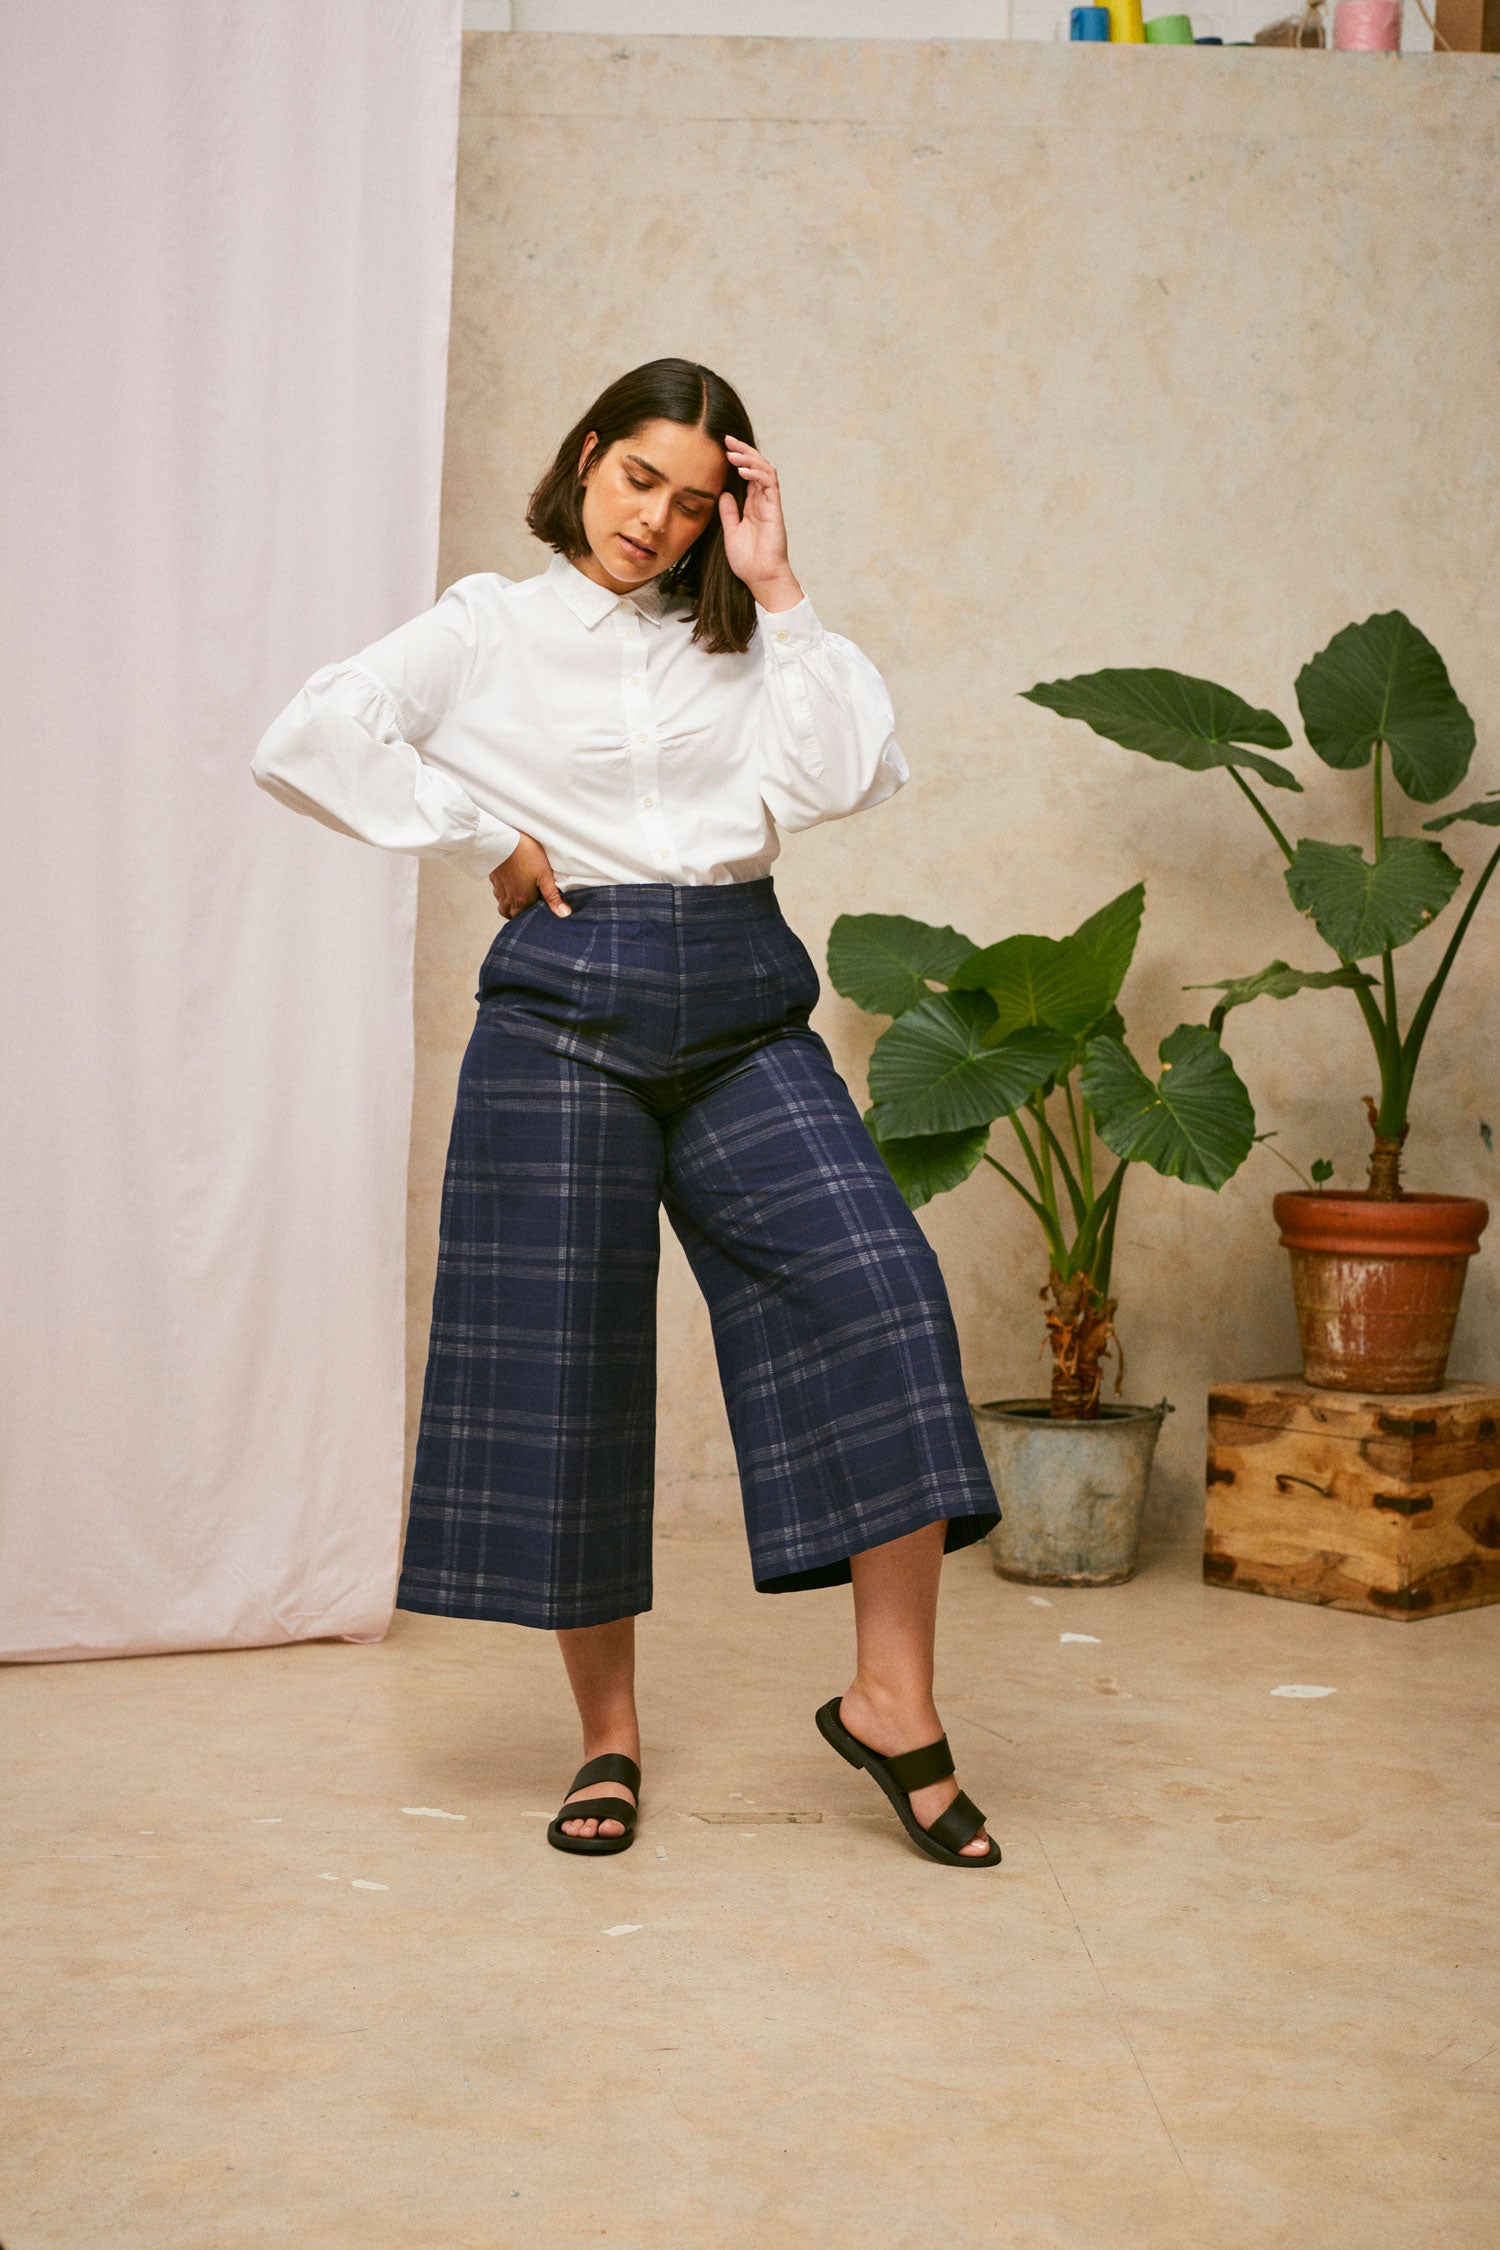 Full length shot of model wearing Saywood's Amelia check trousers, wide leg culotte shape in navy check, with black sandals. Worn with the white shirt, Edi volume sleeve shirt, tucked into the trouser. A plant and drop of pink fabric can be seen in the background.